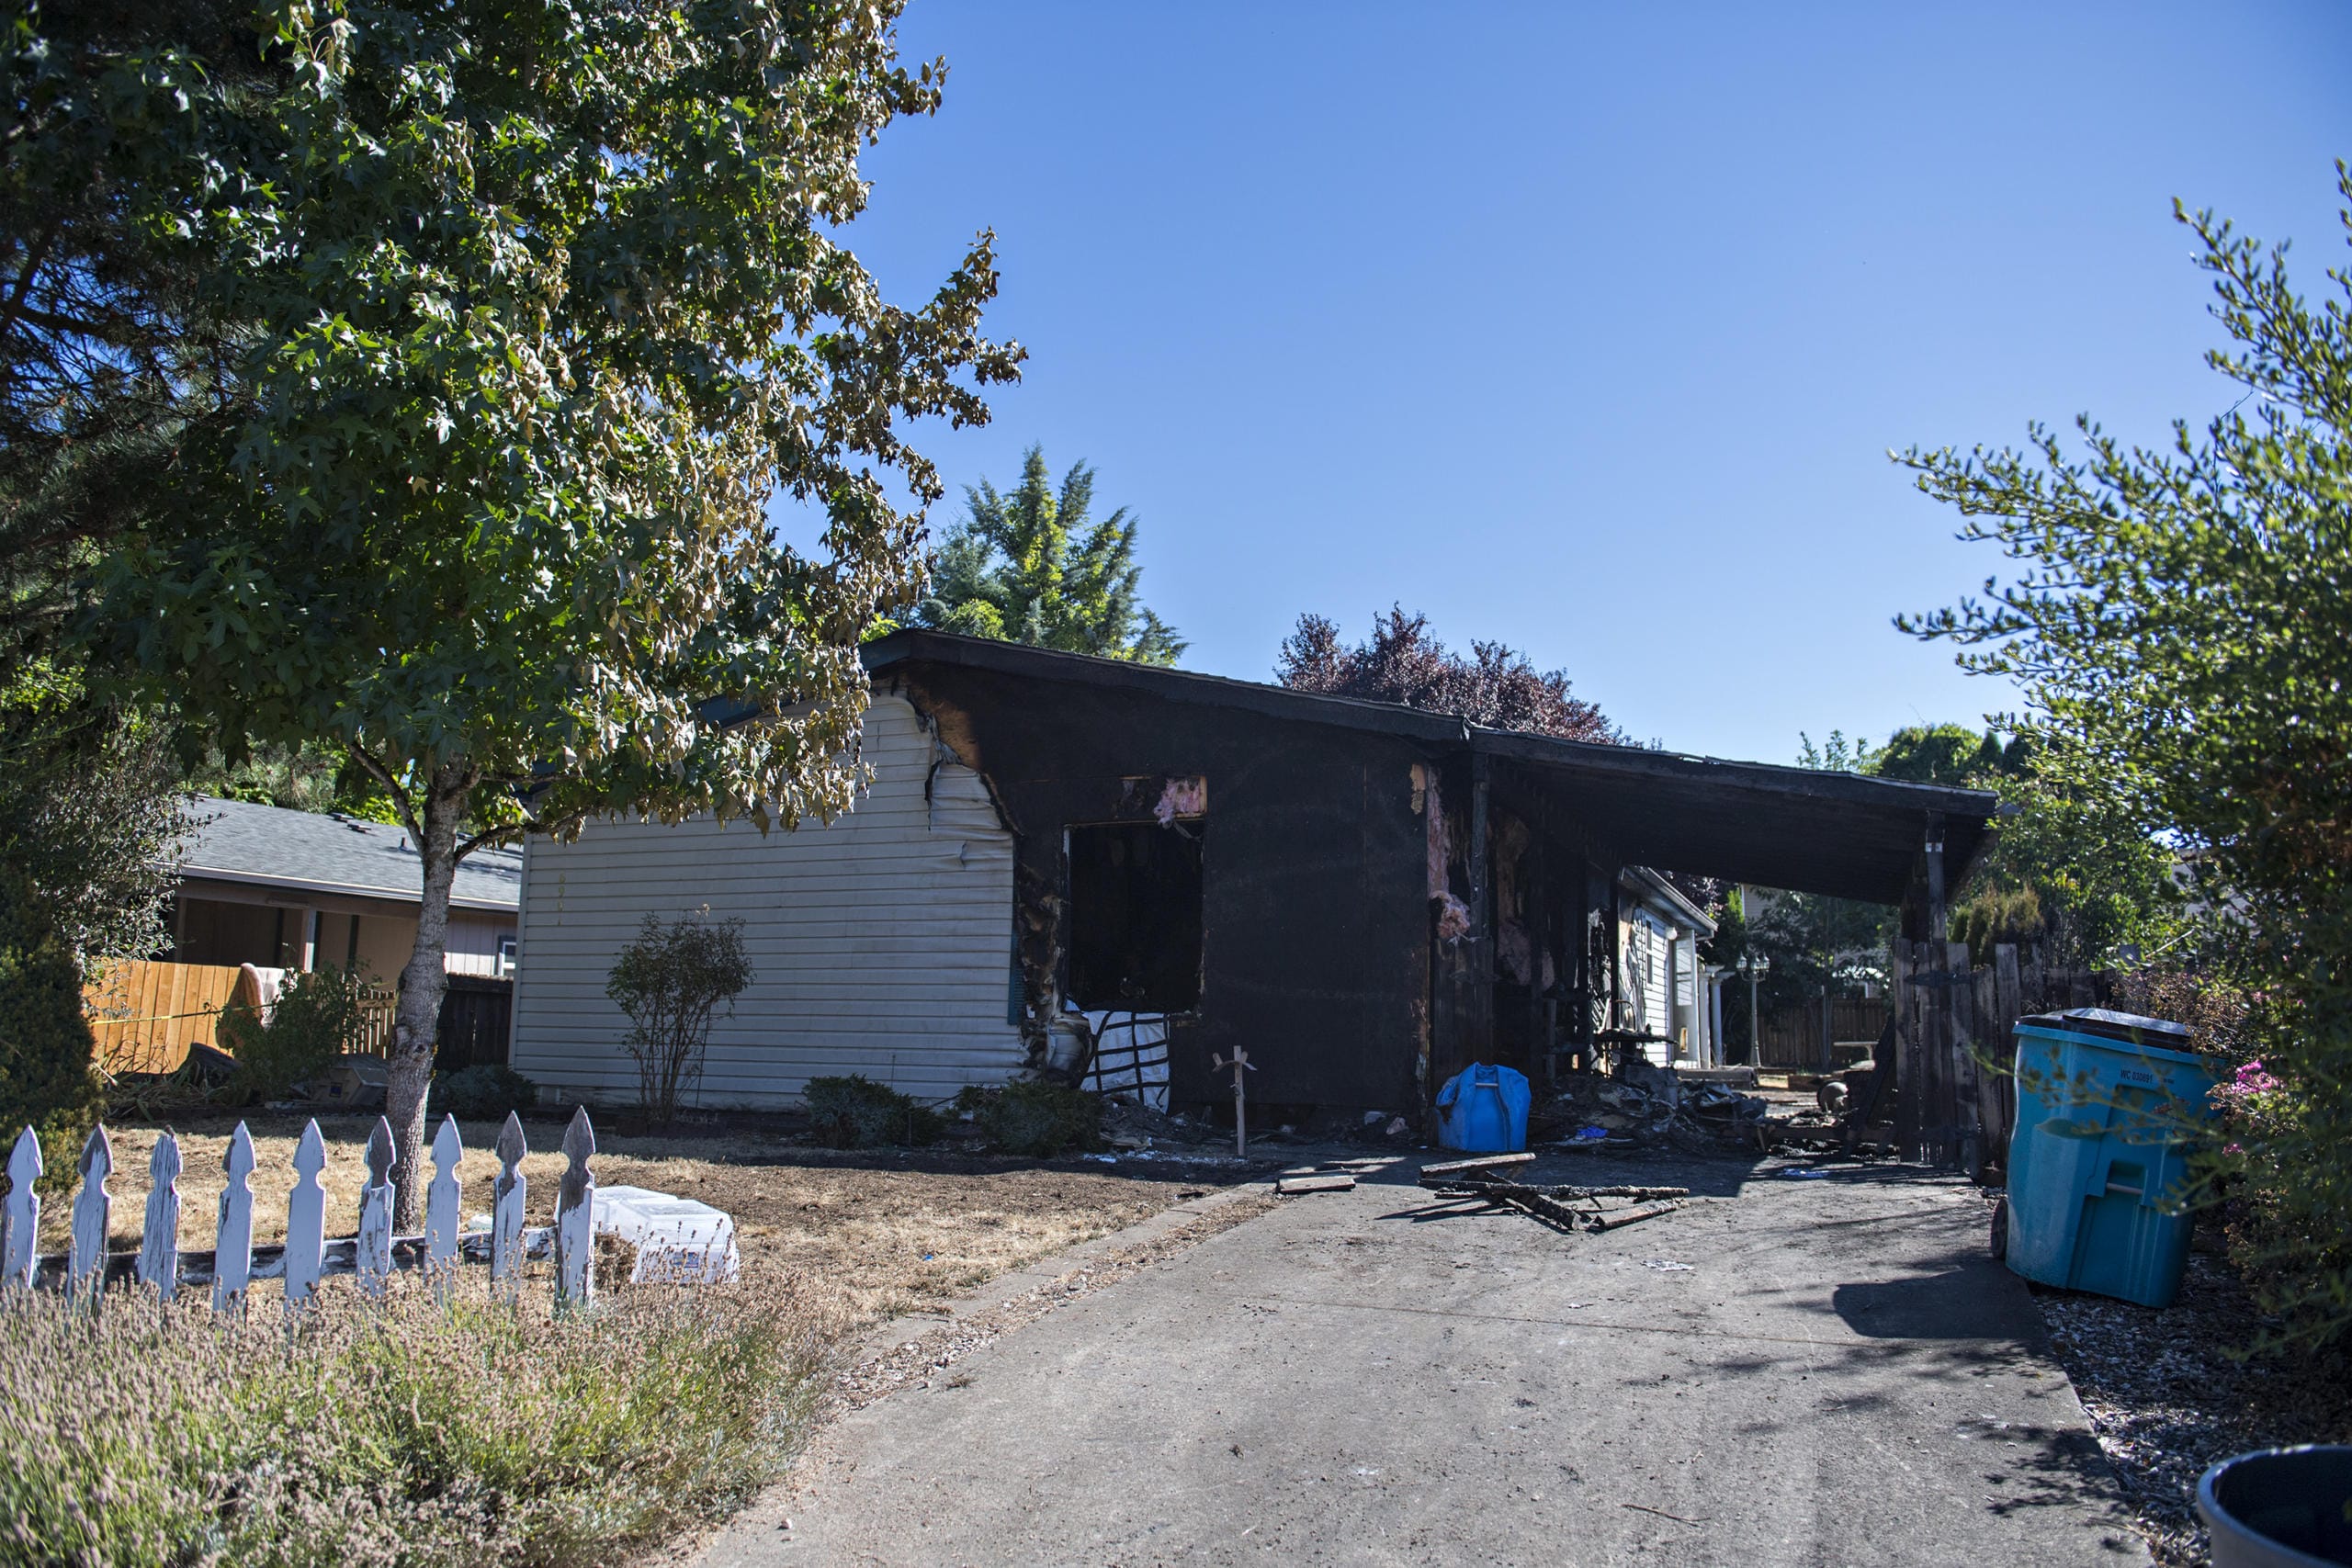 Two people were killed in a fire that consumed the residence at 6901 N.E. 149th Court in the Sifton area on Tuesday evening, as seen Wednesday morning, Sept. 2, 2020.